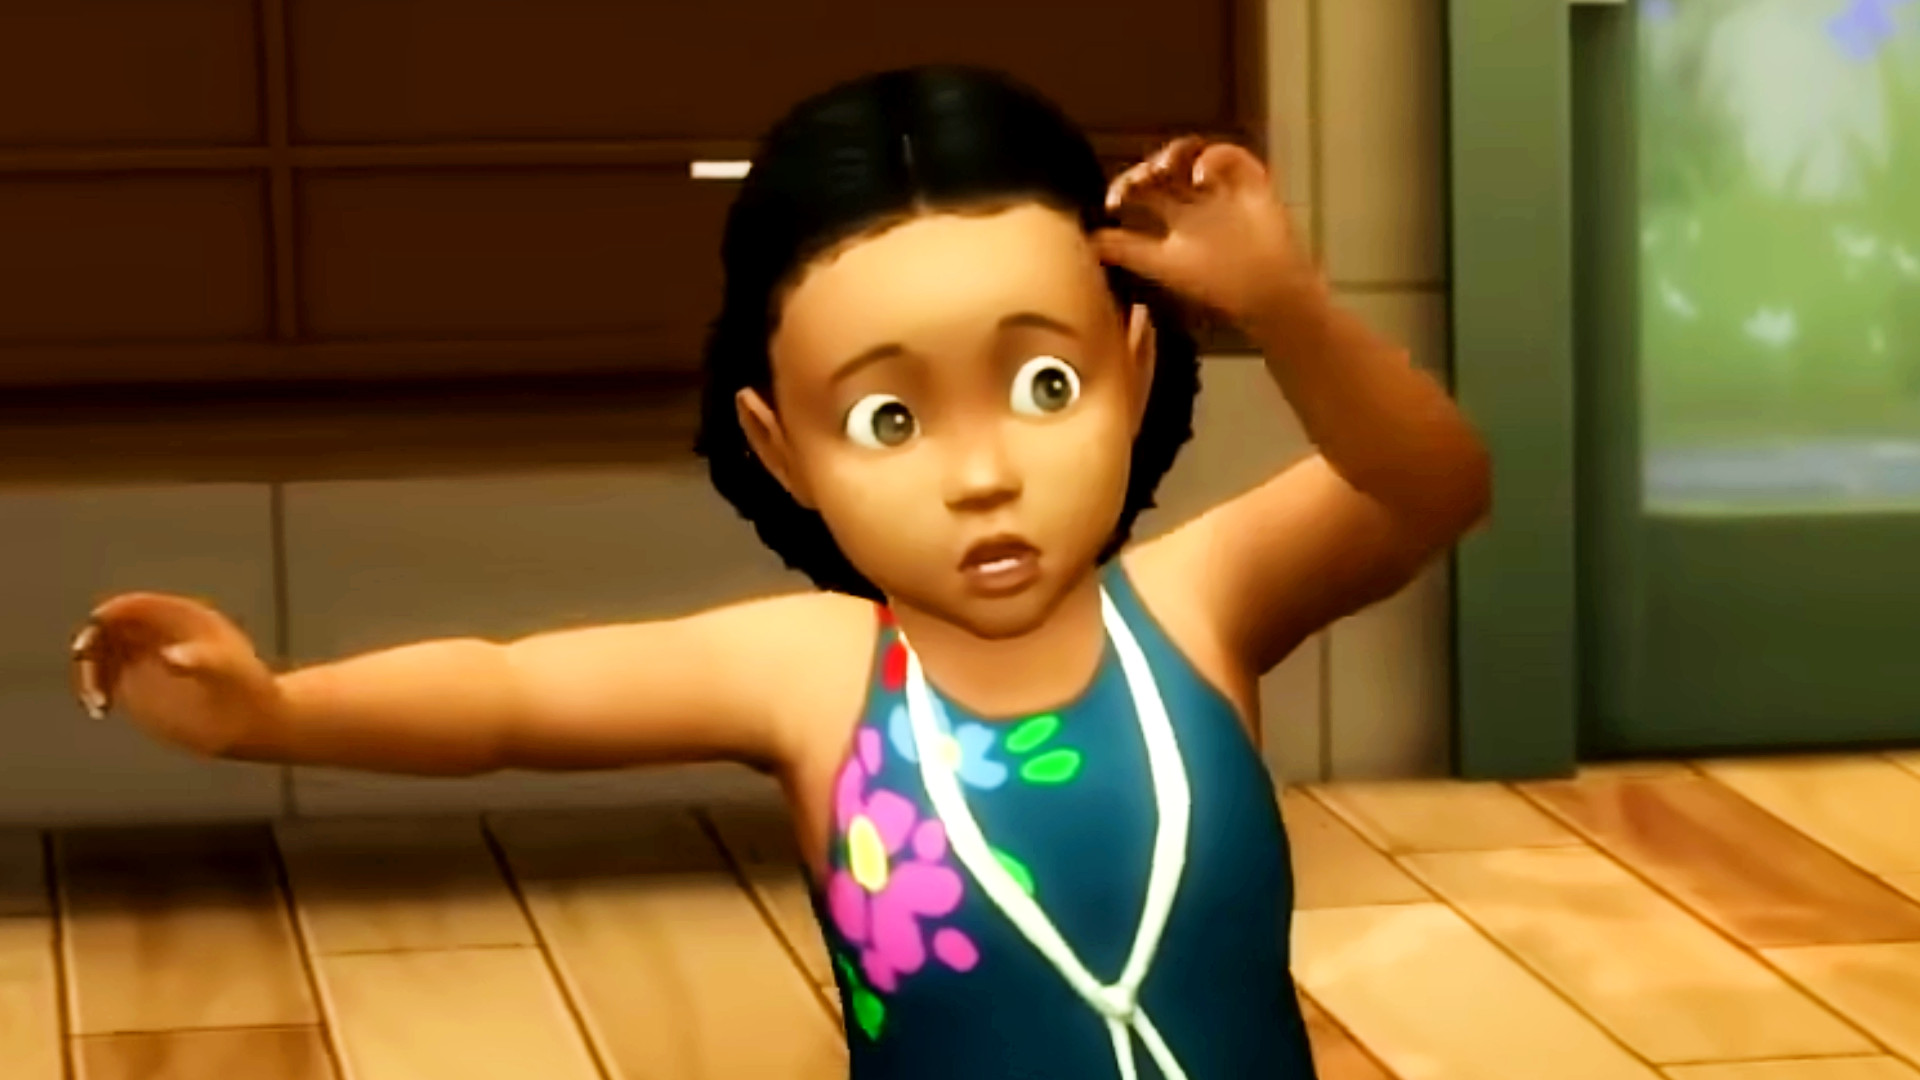 The Sims 4 toddlers, wants, and fears top EA's 'laundry list' for 2023